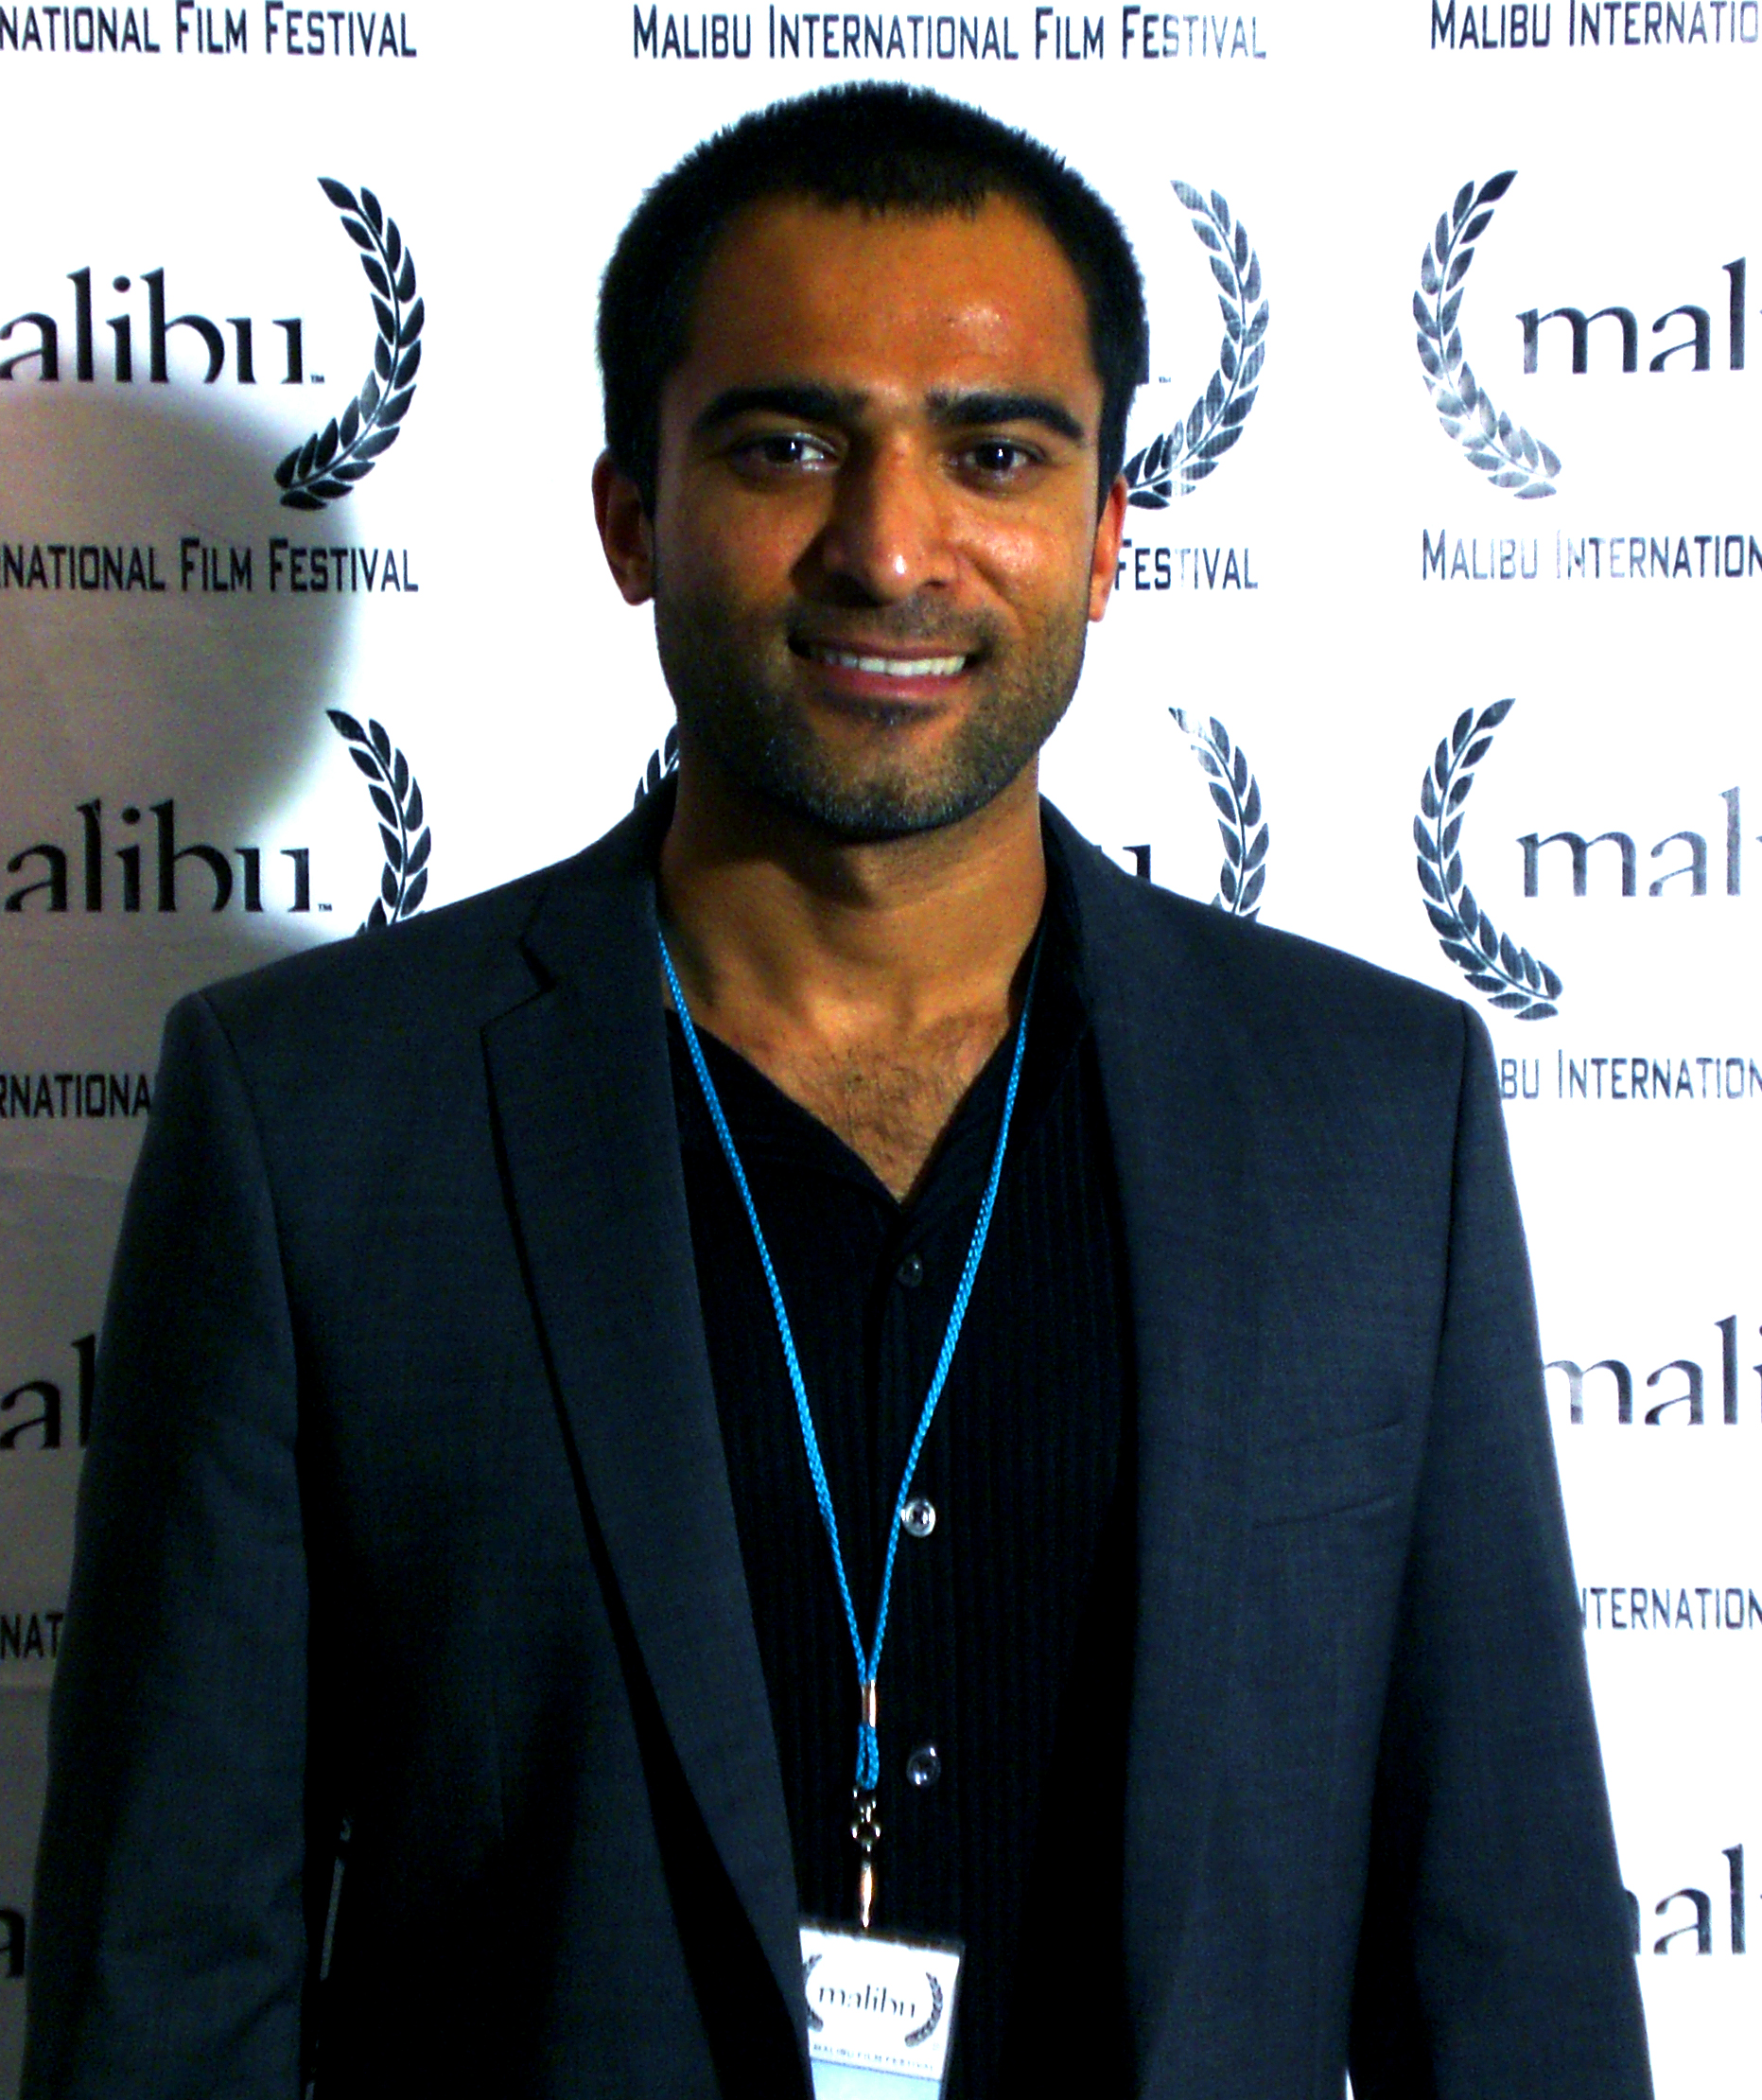 Pereira at 2009 Malibu Film Festival for WHO'S GOOD LOOKING?